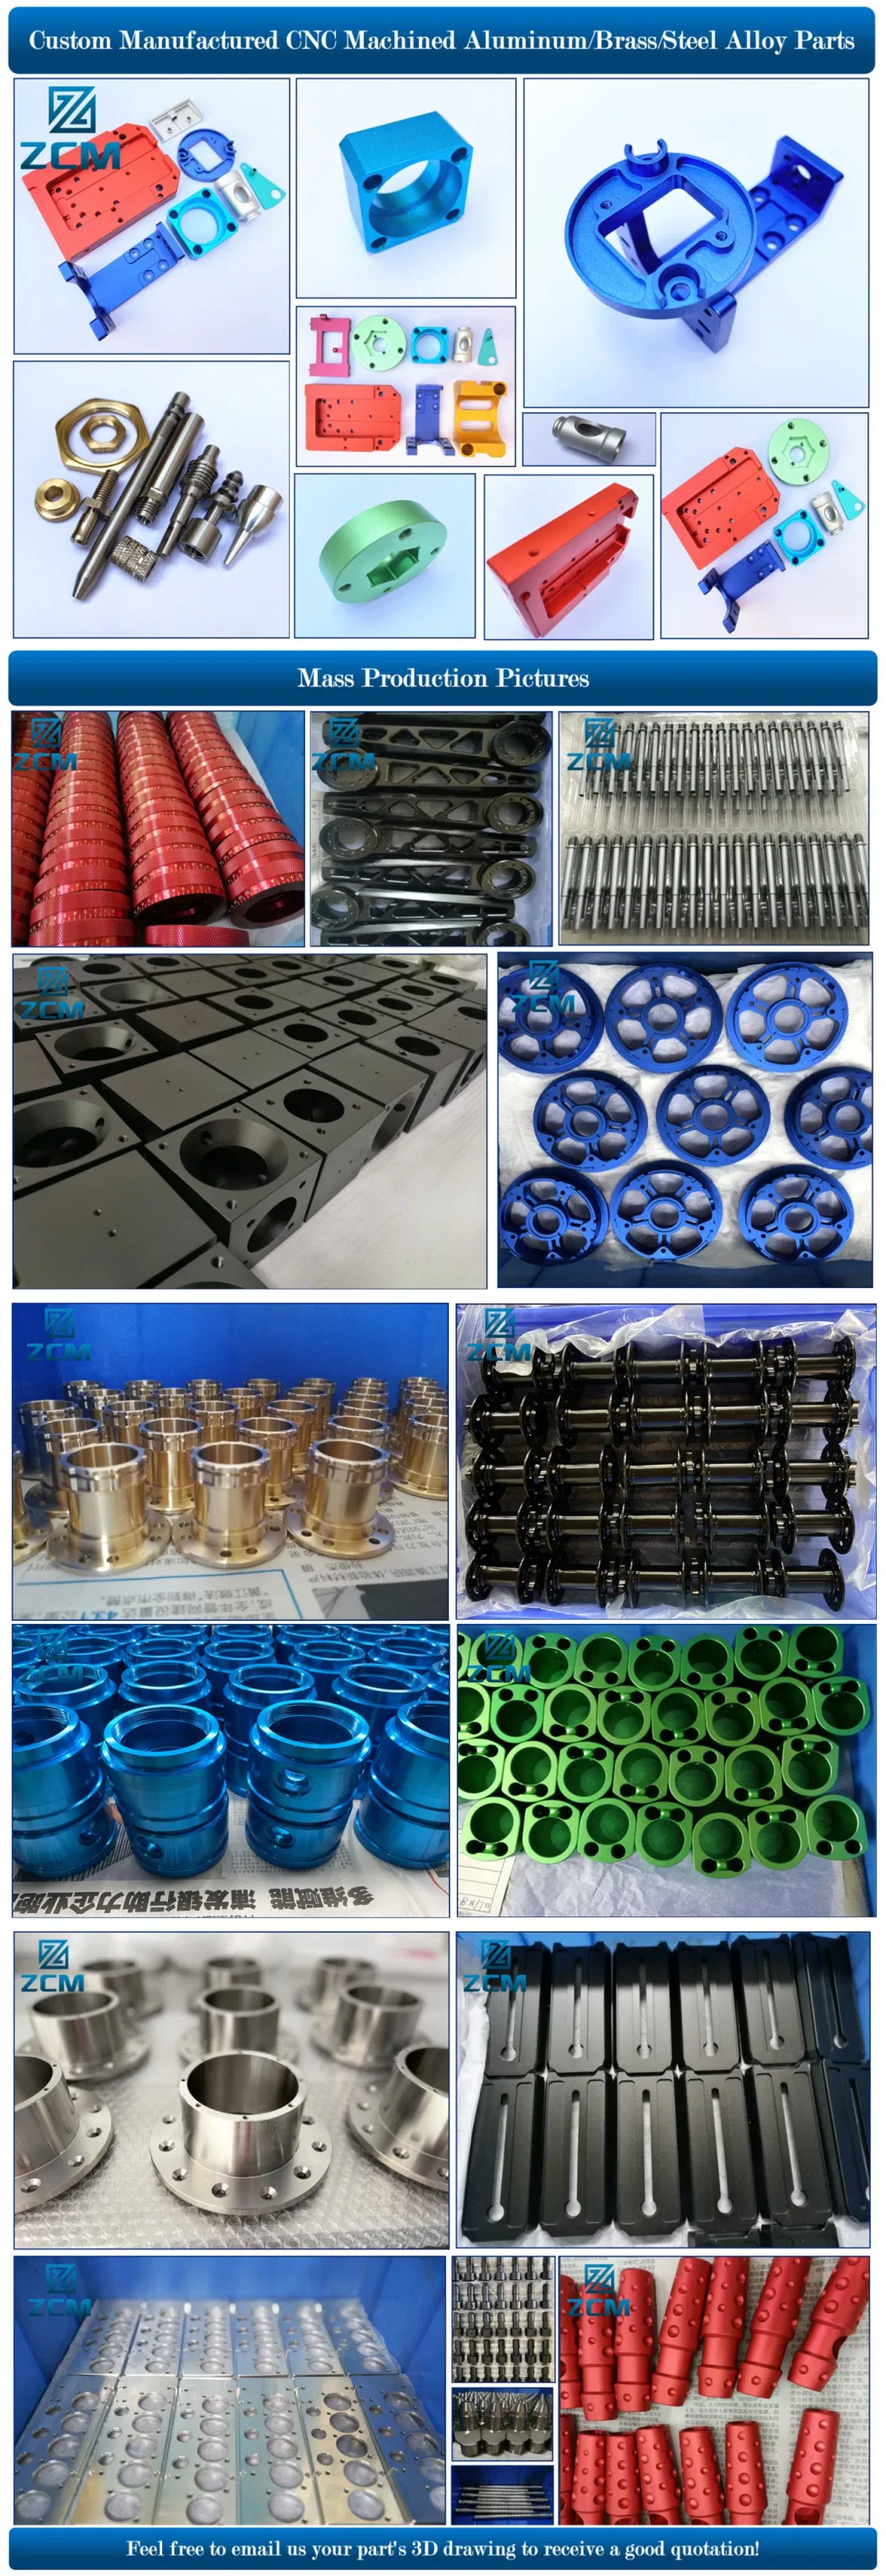 Custom CNC Machining Aluminum Auto Automotive Motorcycle Machined Part Steel Sensor Machine Machinery Motor Electric Car Engine Plate Oil Cooler Adapters Parts